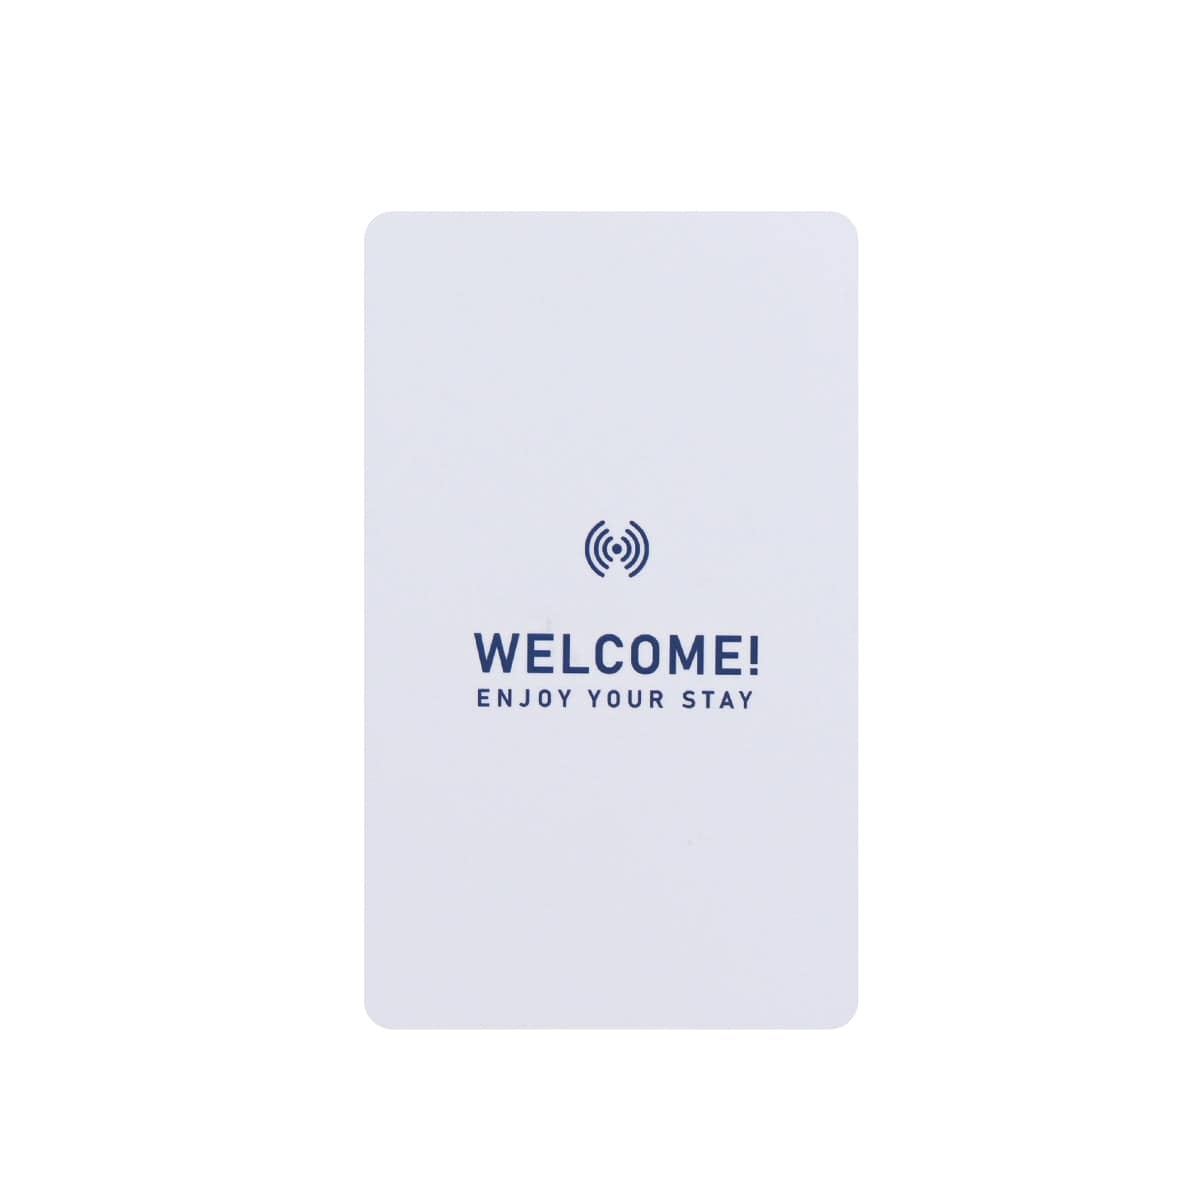 Assa Abloy Compatible Generic Enjoy Your Stay White RFID Key Cards (Sold in boxes of 200)